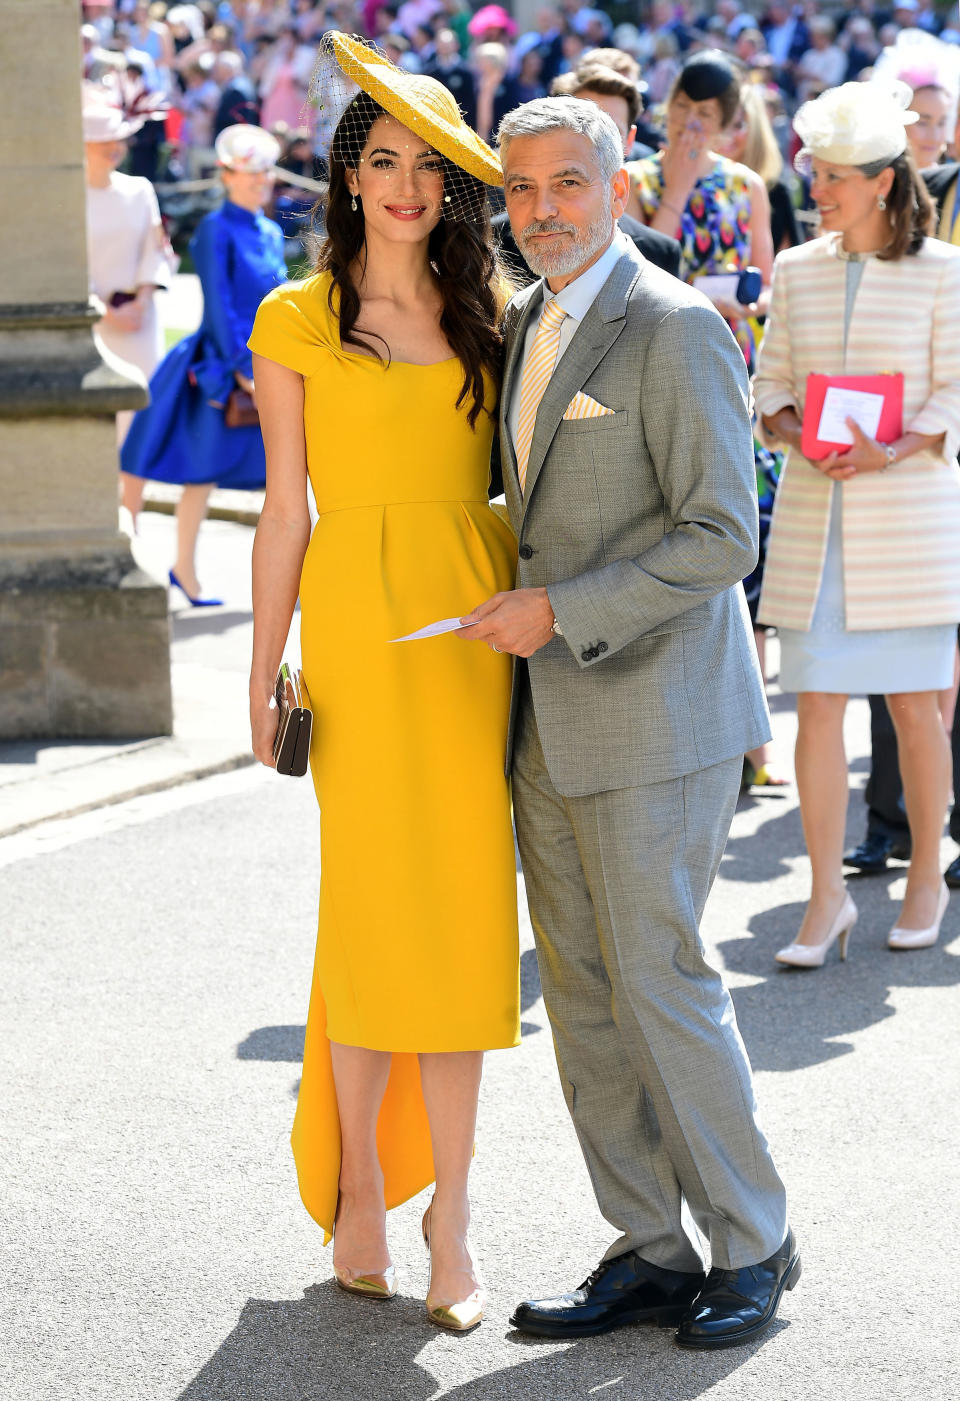 Amal Clooney wore a bold, Stella McCartney look to the royal wedding in May [Photo: PA Wire]